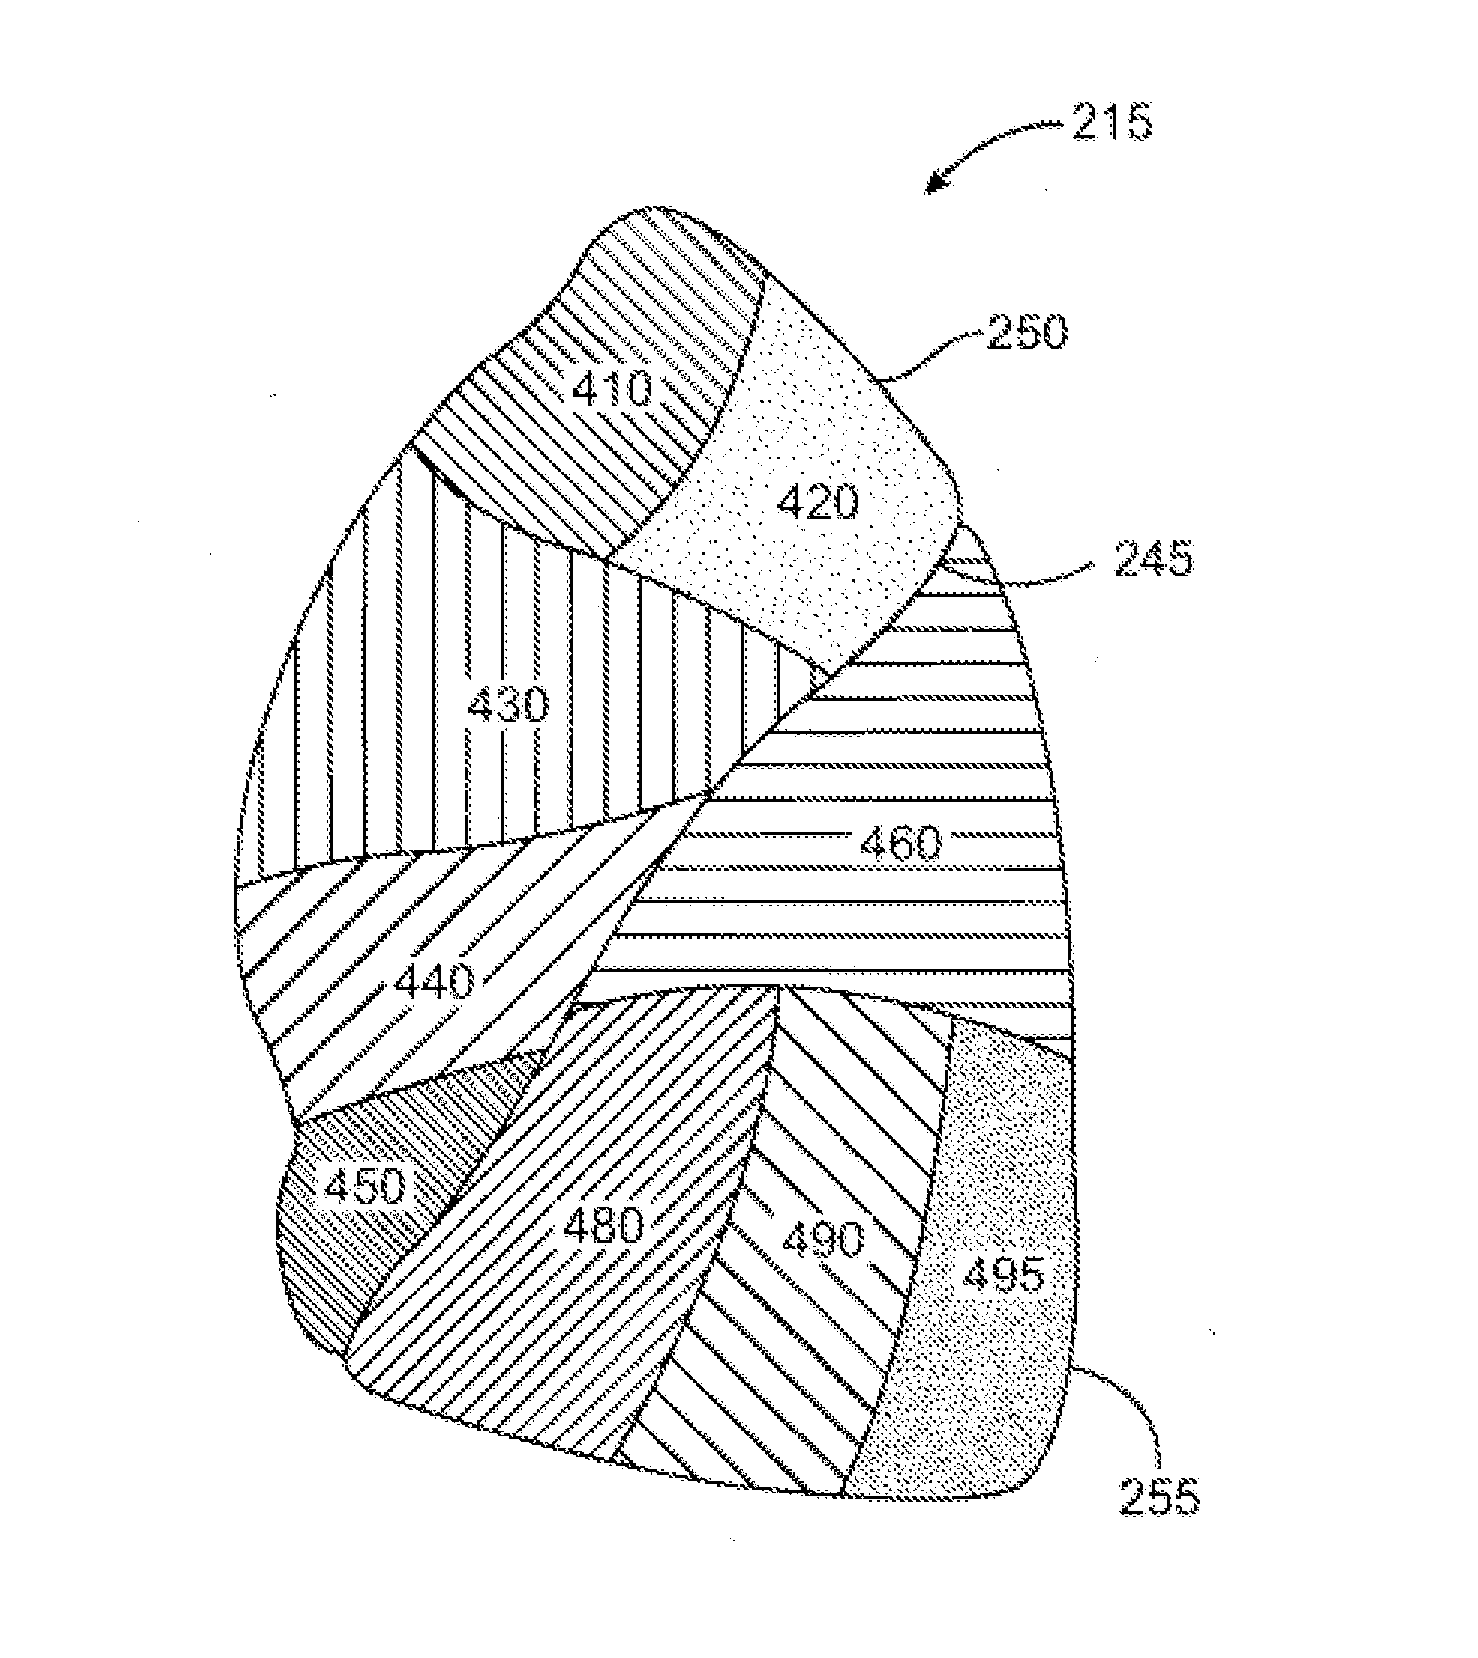 Bronchial isolation devices for placement in short lumens